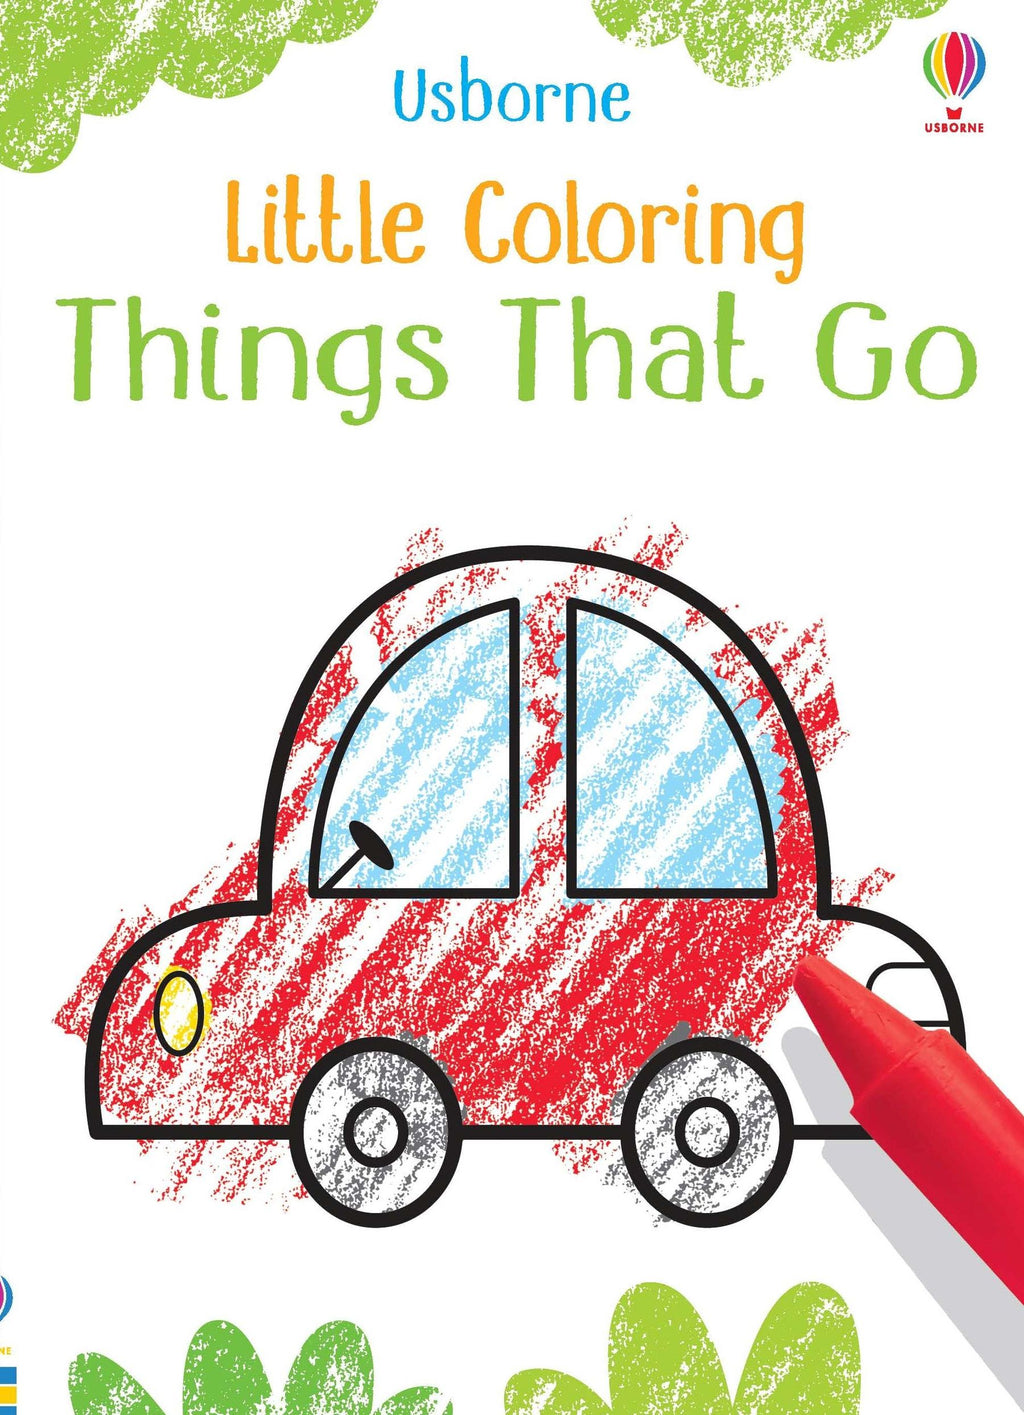 Usborne Little Coloring Things That Go Book